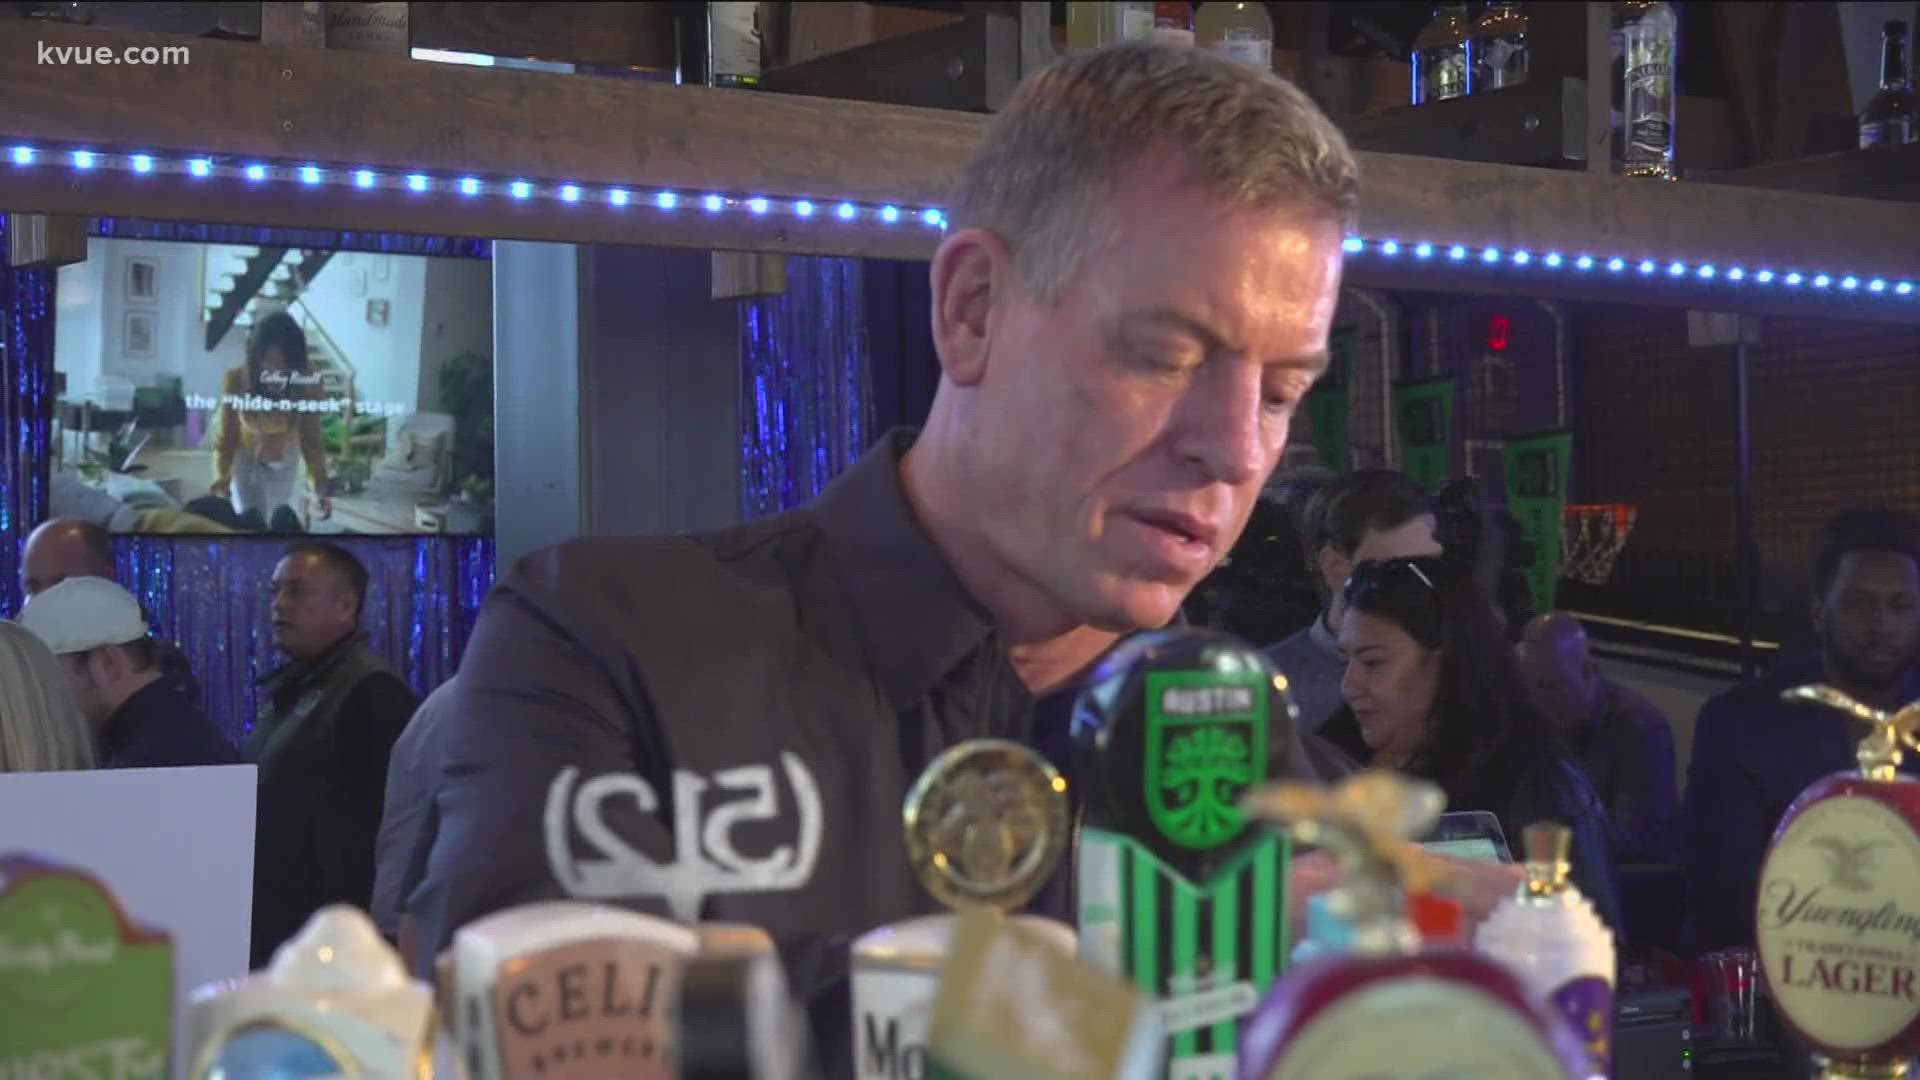 Earlier this year, Aikman announced that his new beer, EIGHT, would hit Texas bars and restaurants in February.